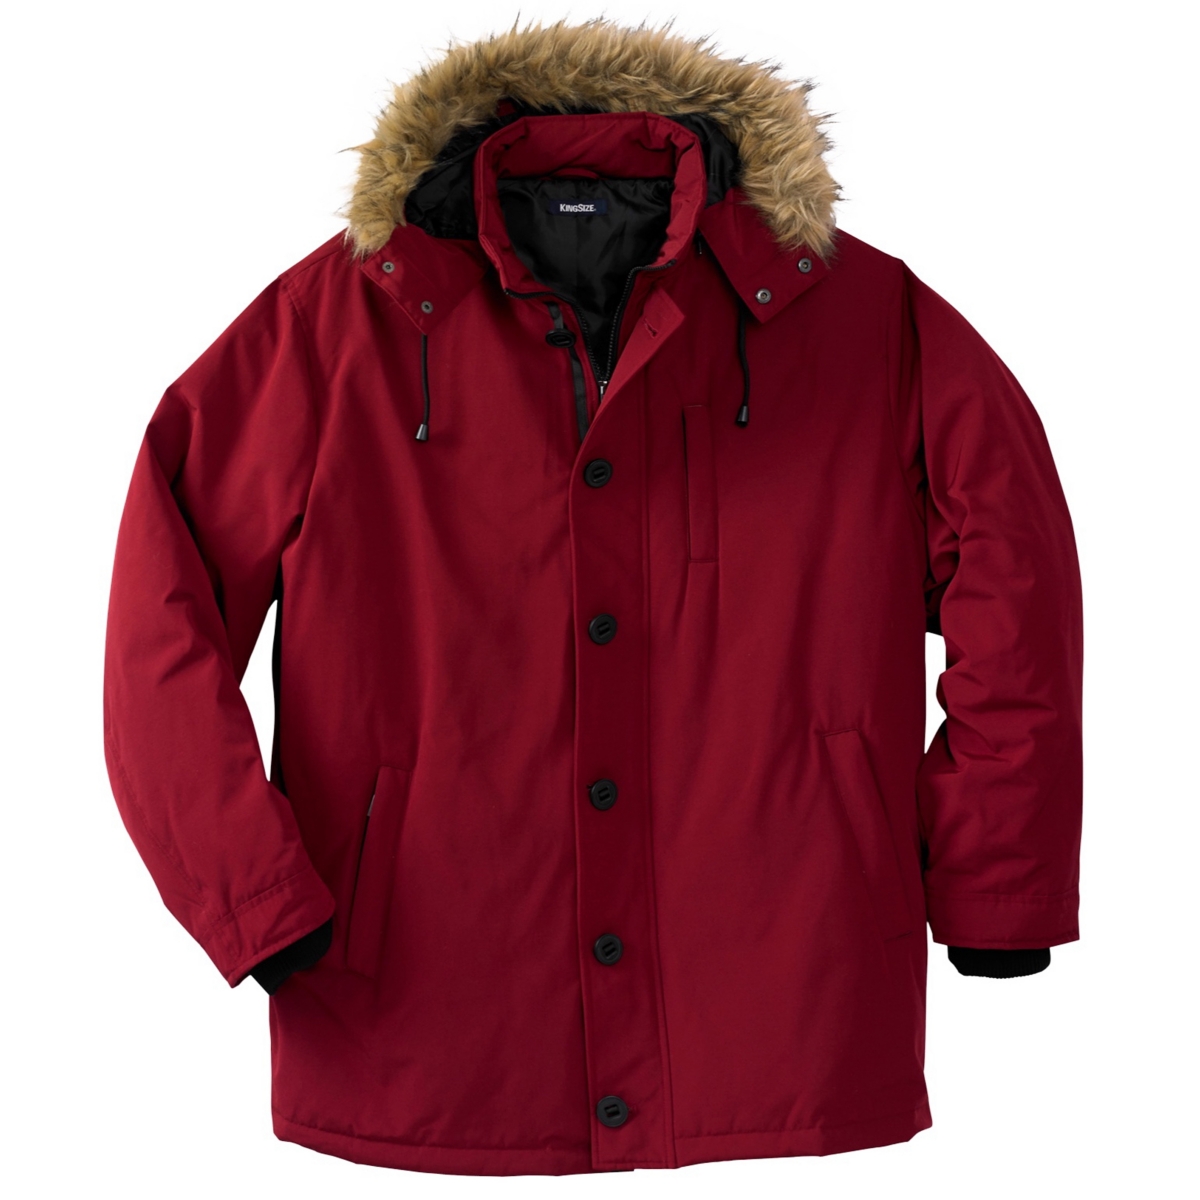 Big & Tall Arctic Down Parka With Detachable Hood And Insulated Cuffs - Rich burgundy